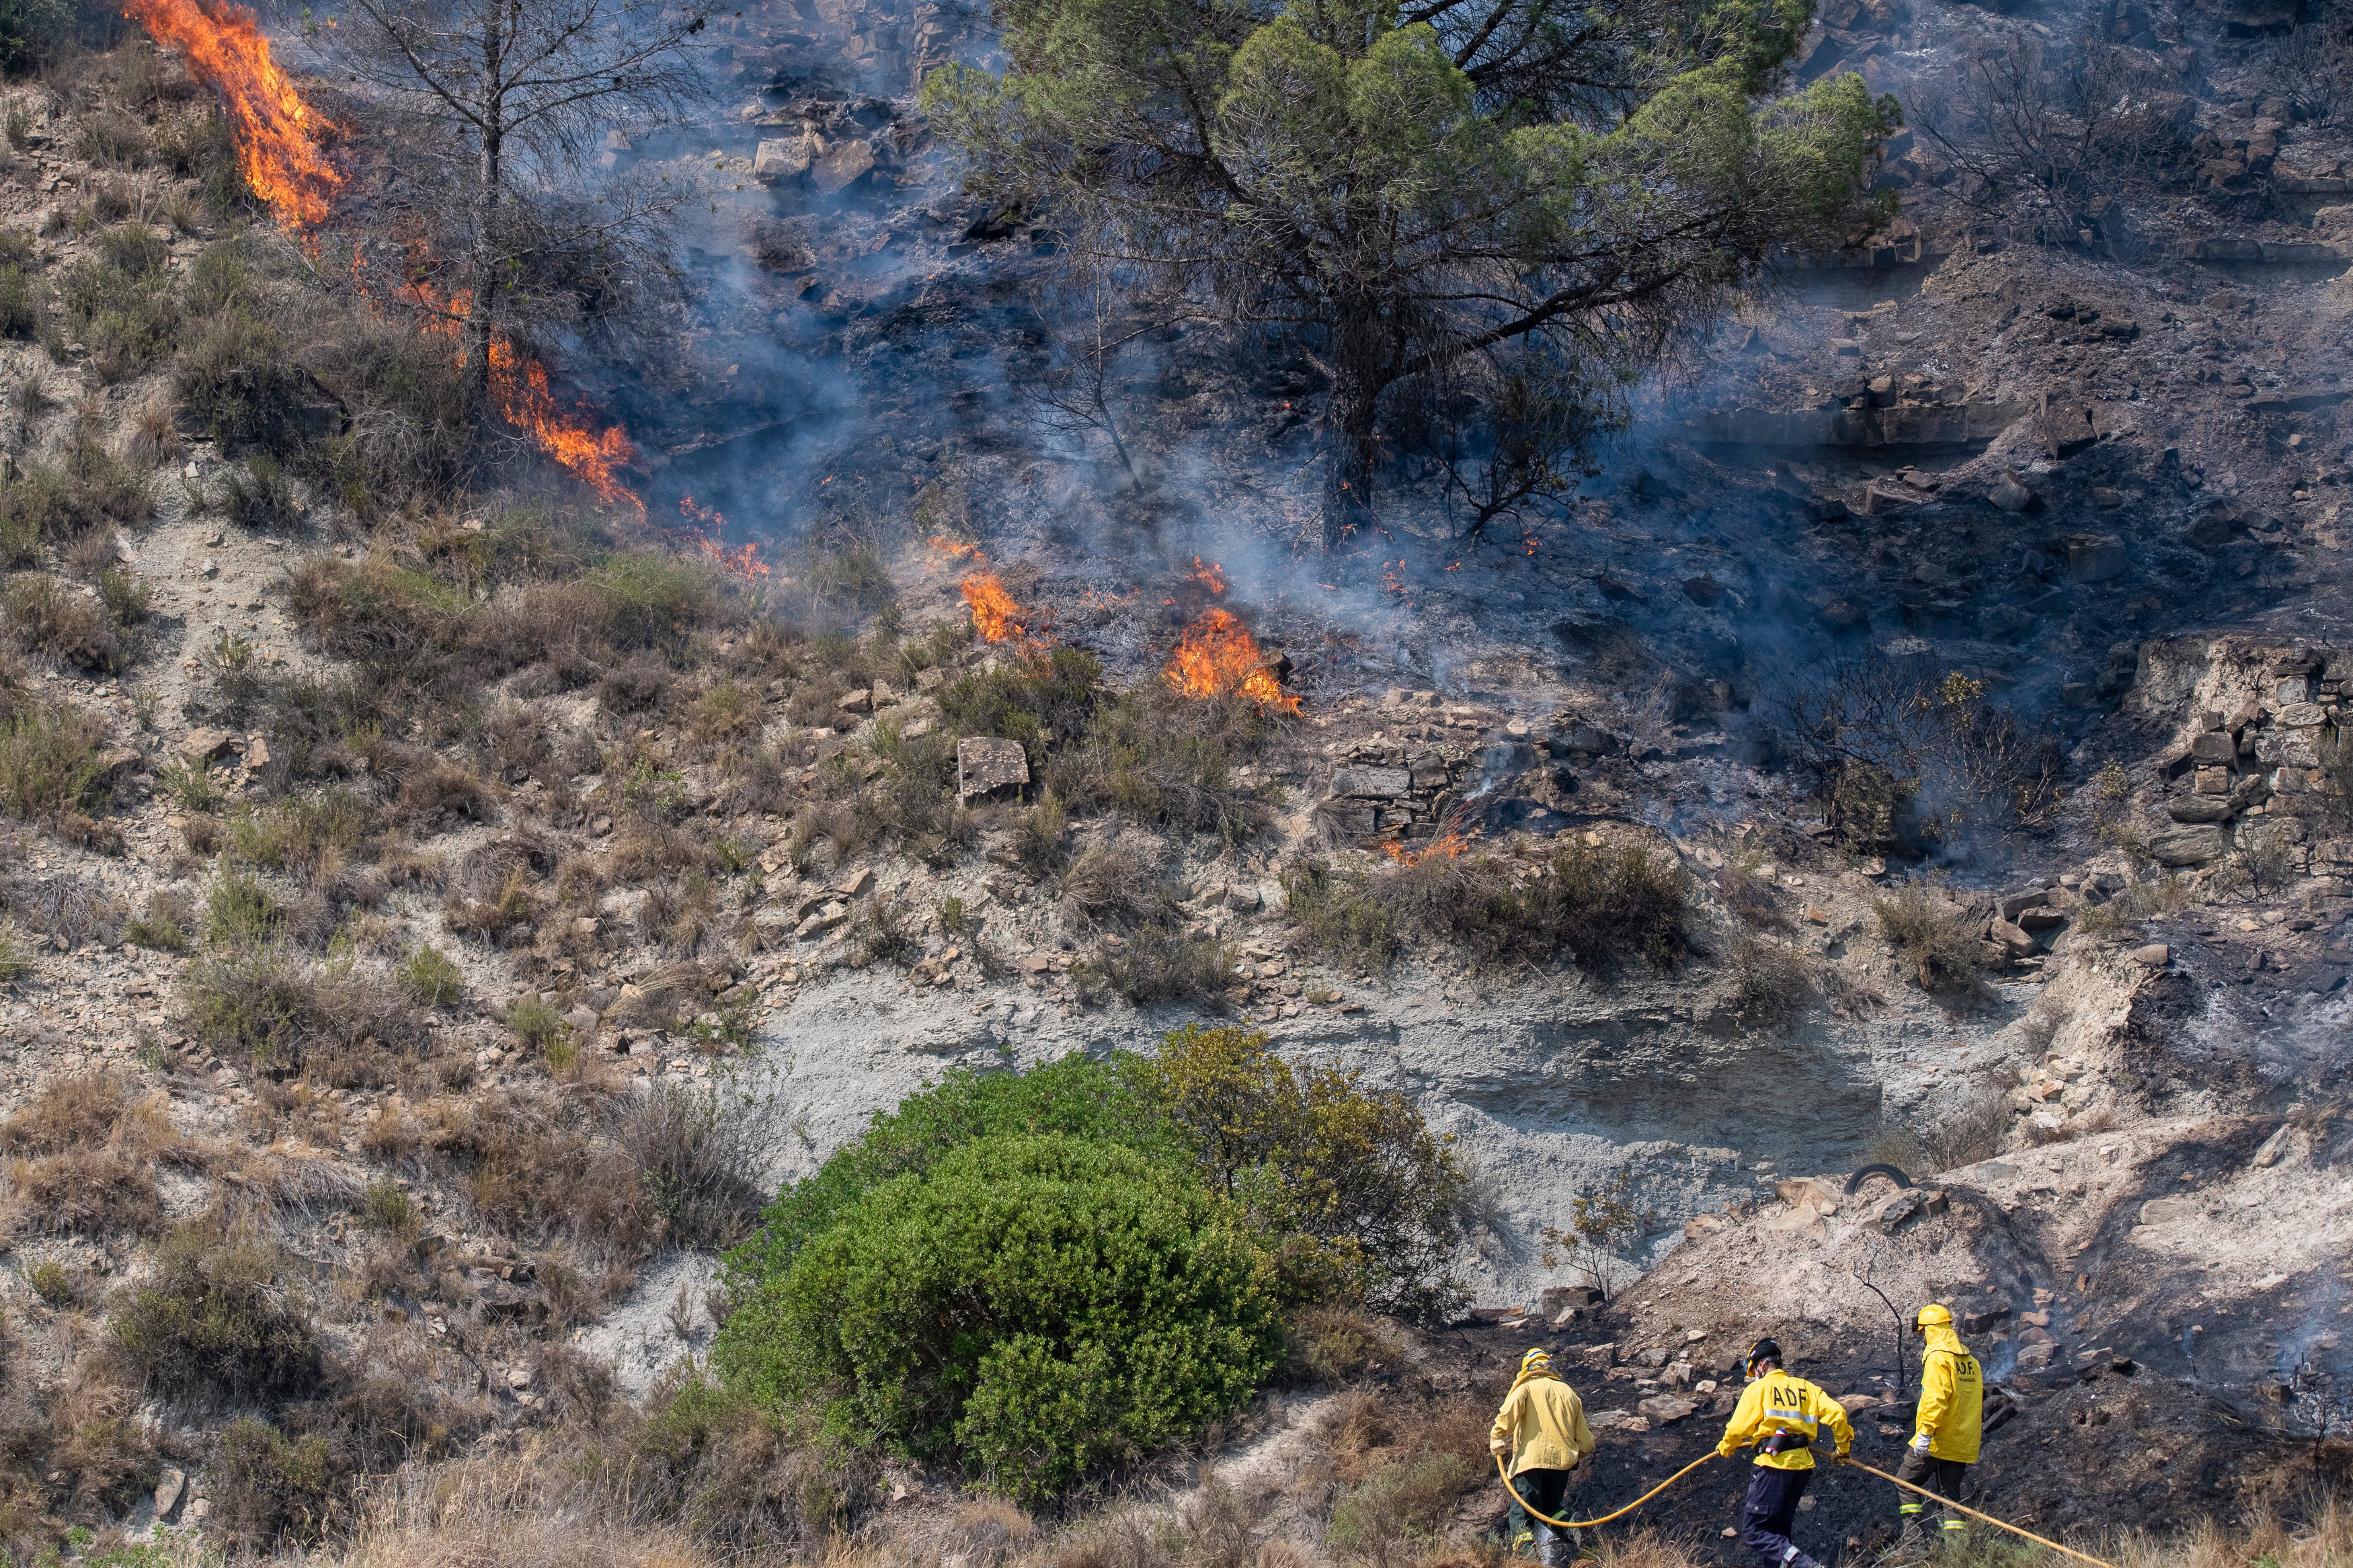 Vegetable area with fire affected by a new fire near the old landfill of Pont de Vilomara, on July 18, 2022, Barcelona, Catalonia (Spain). (Photo: Europa Press, AP)